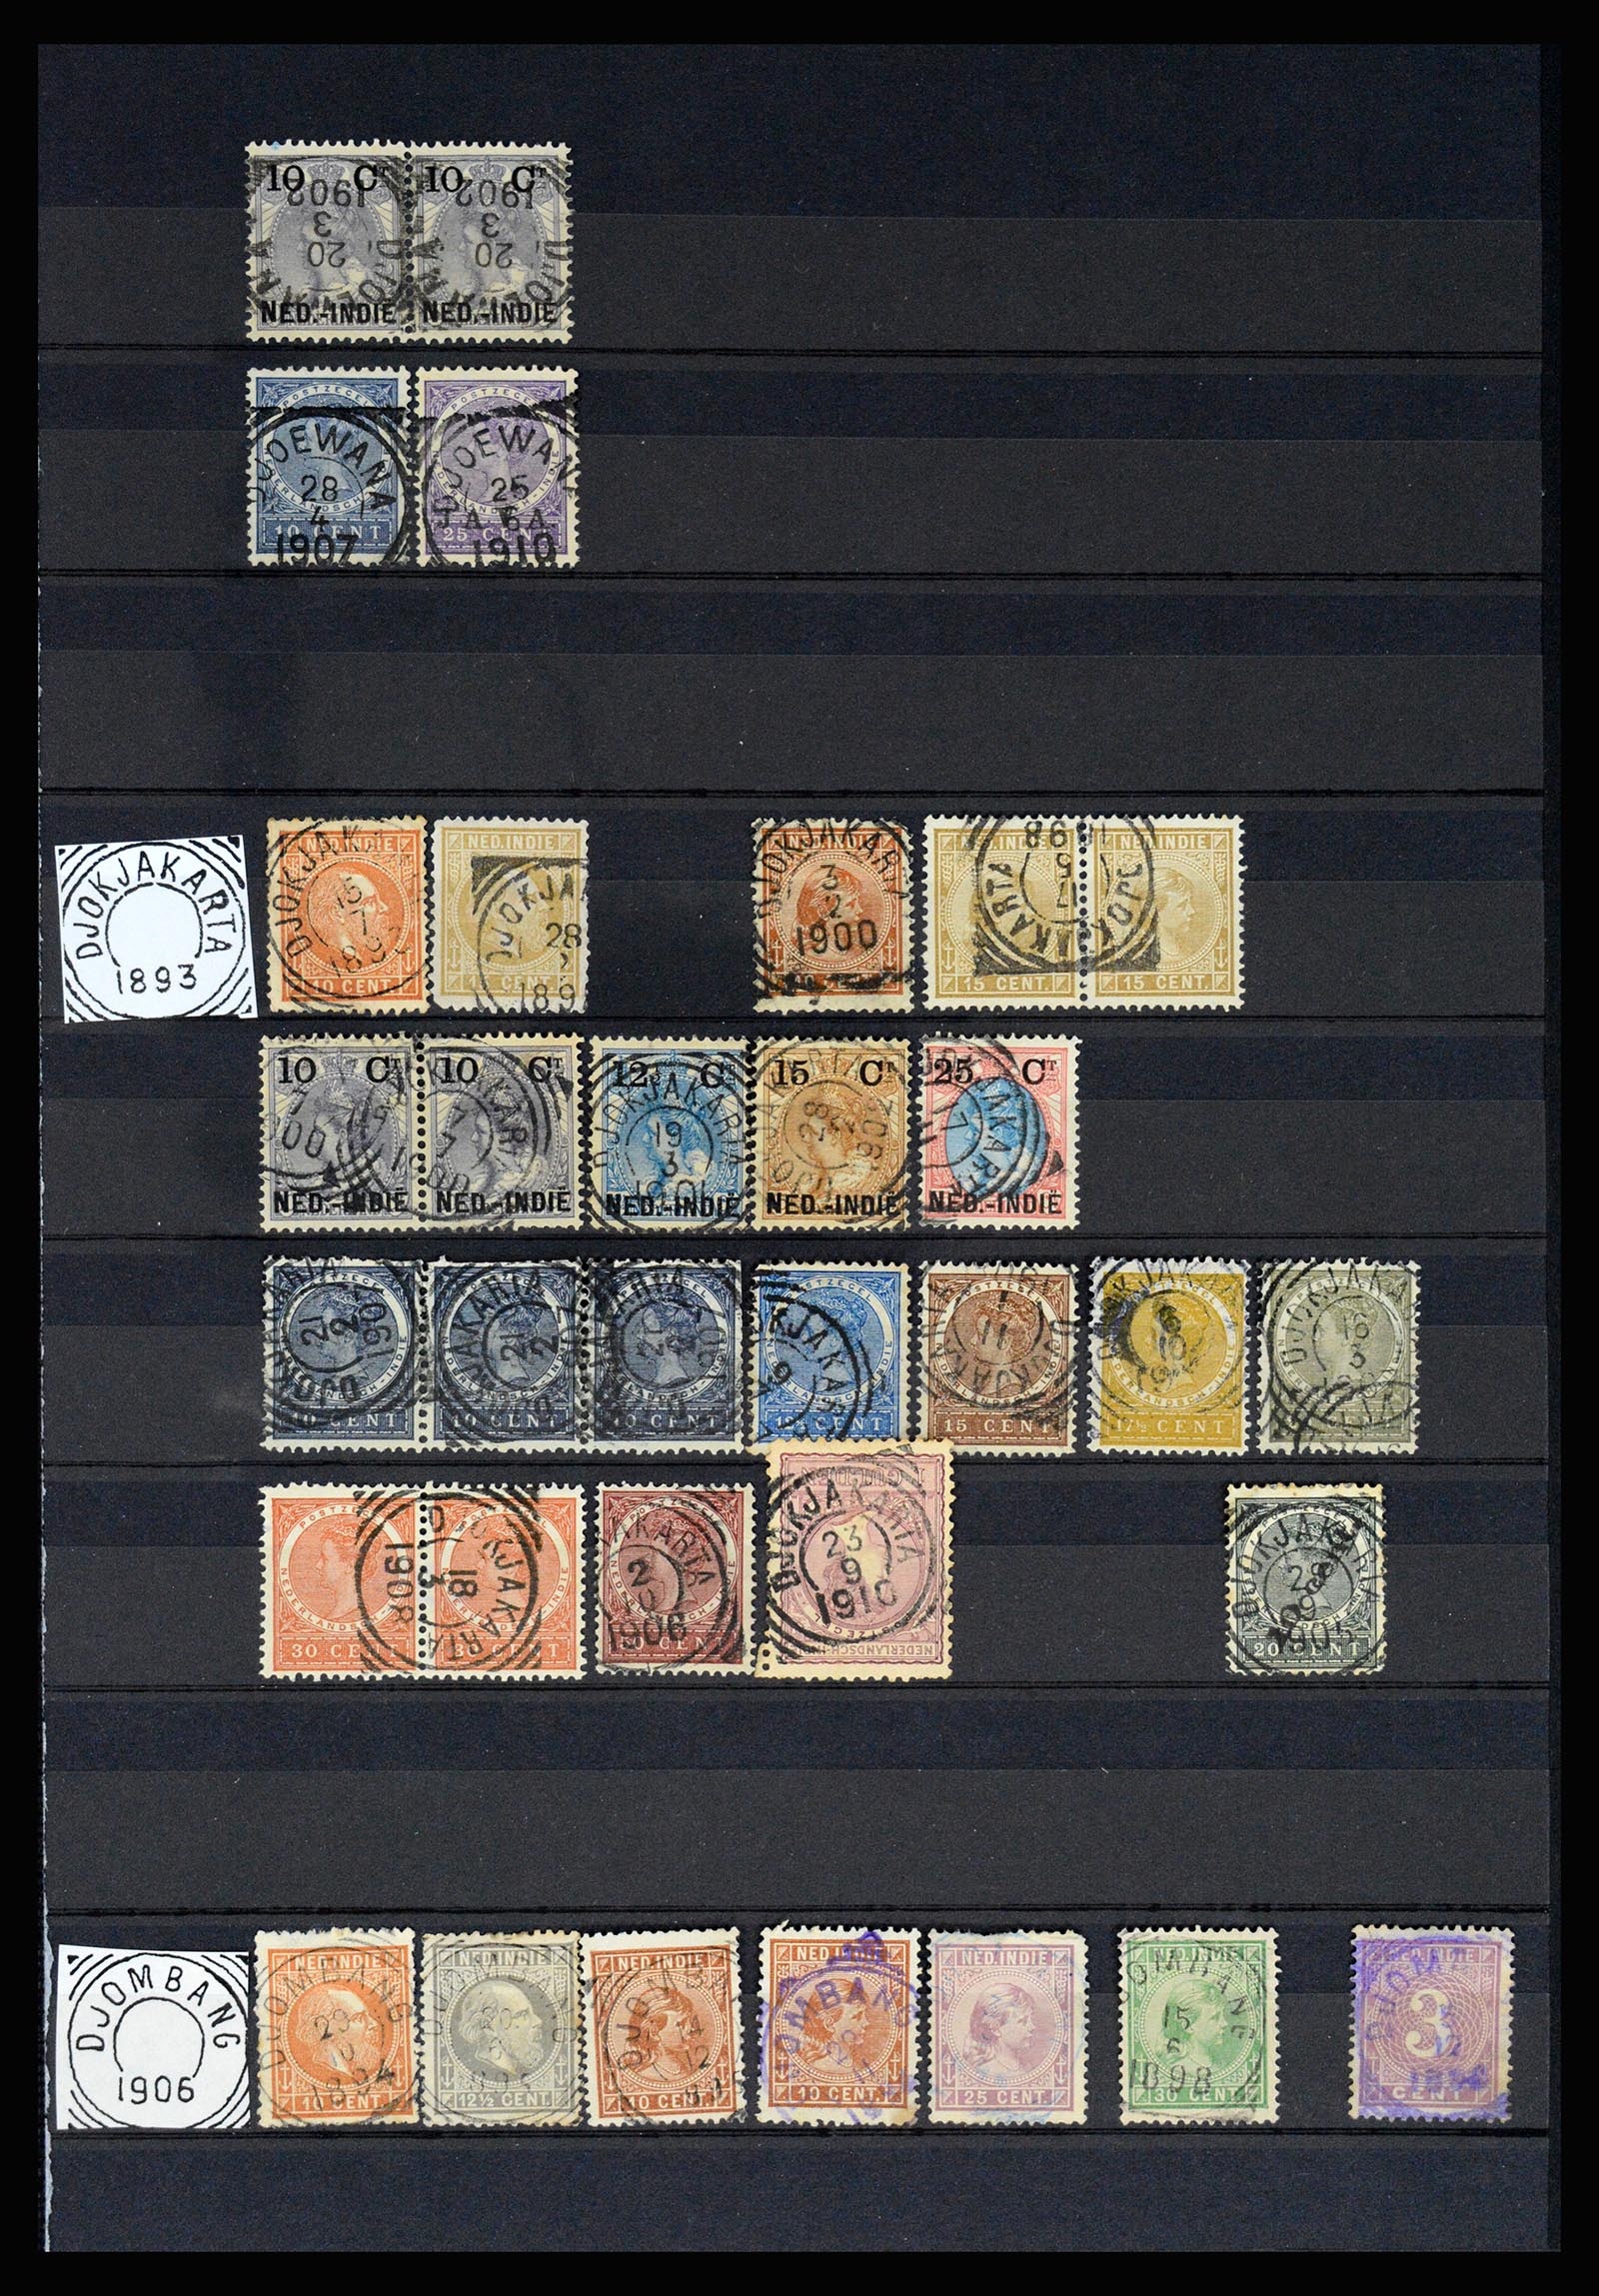 36839 014 - Stamp collection 36839 Dutch east Indies square cancels.